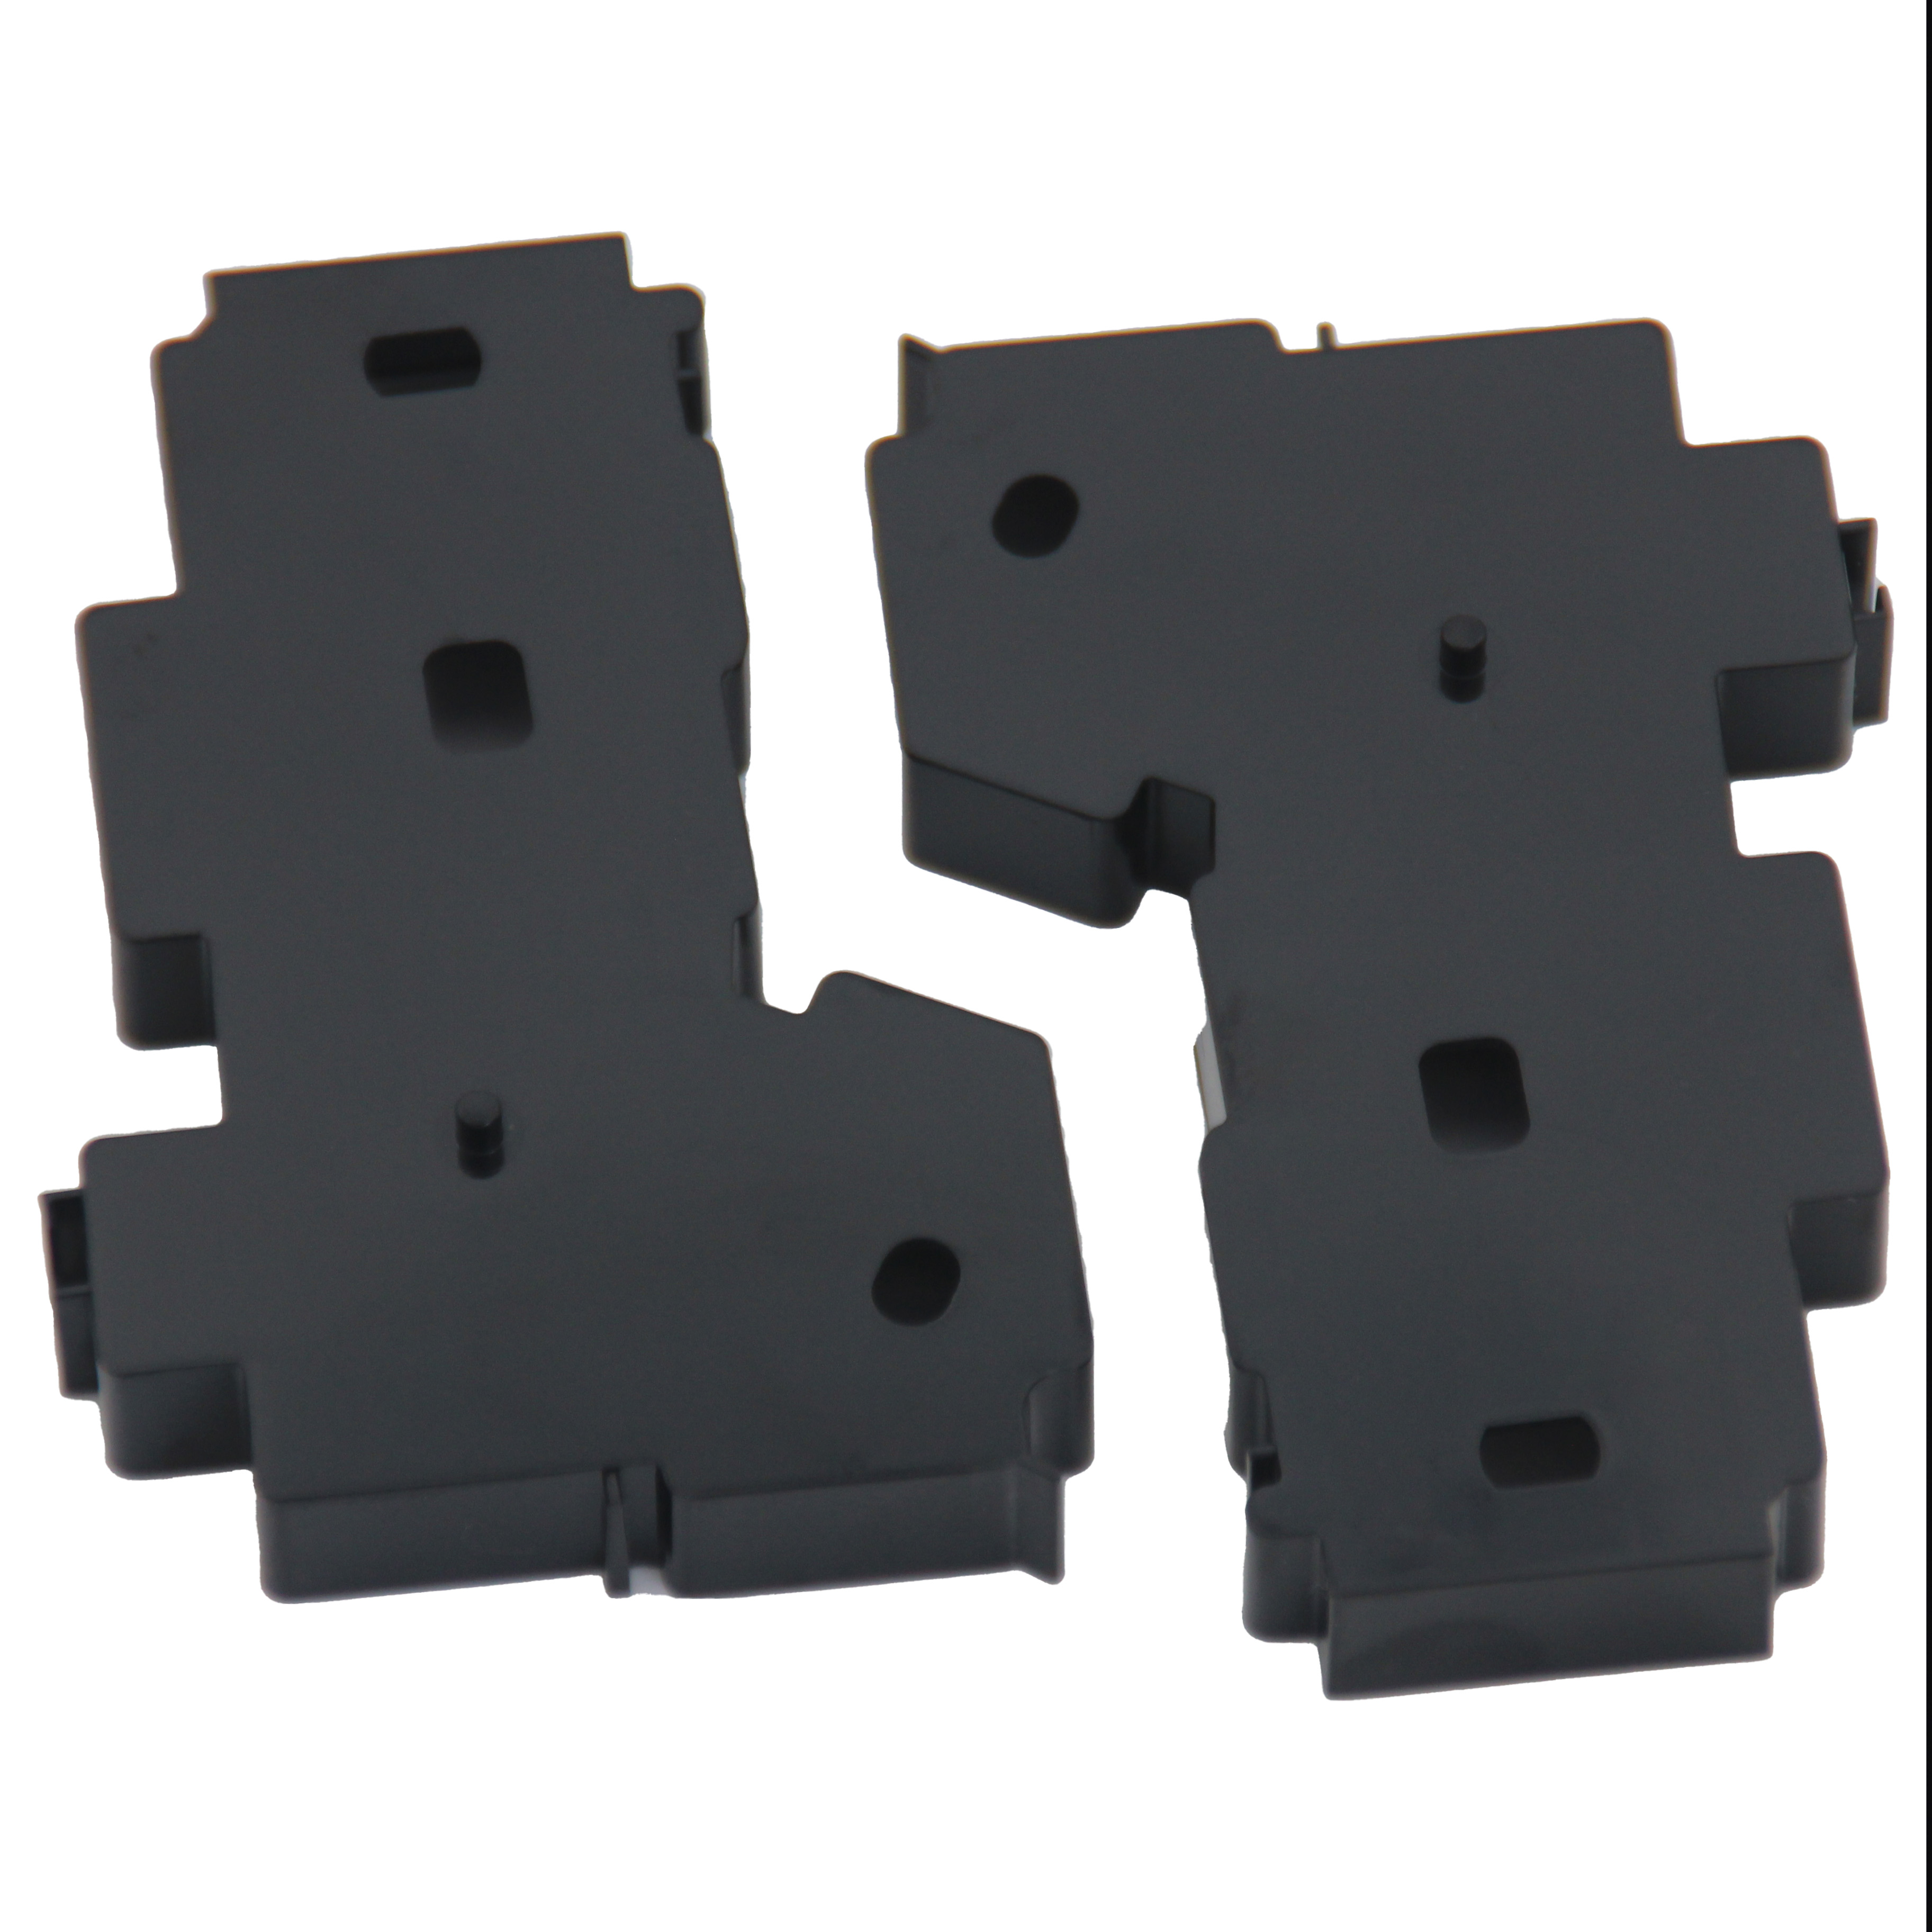 OEM Custom Injection Molding of PC+ABS Material for Automotive Electronic Product Plastic Parts – Bracket GDD6354